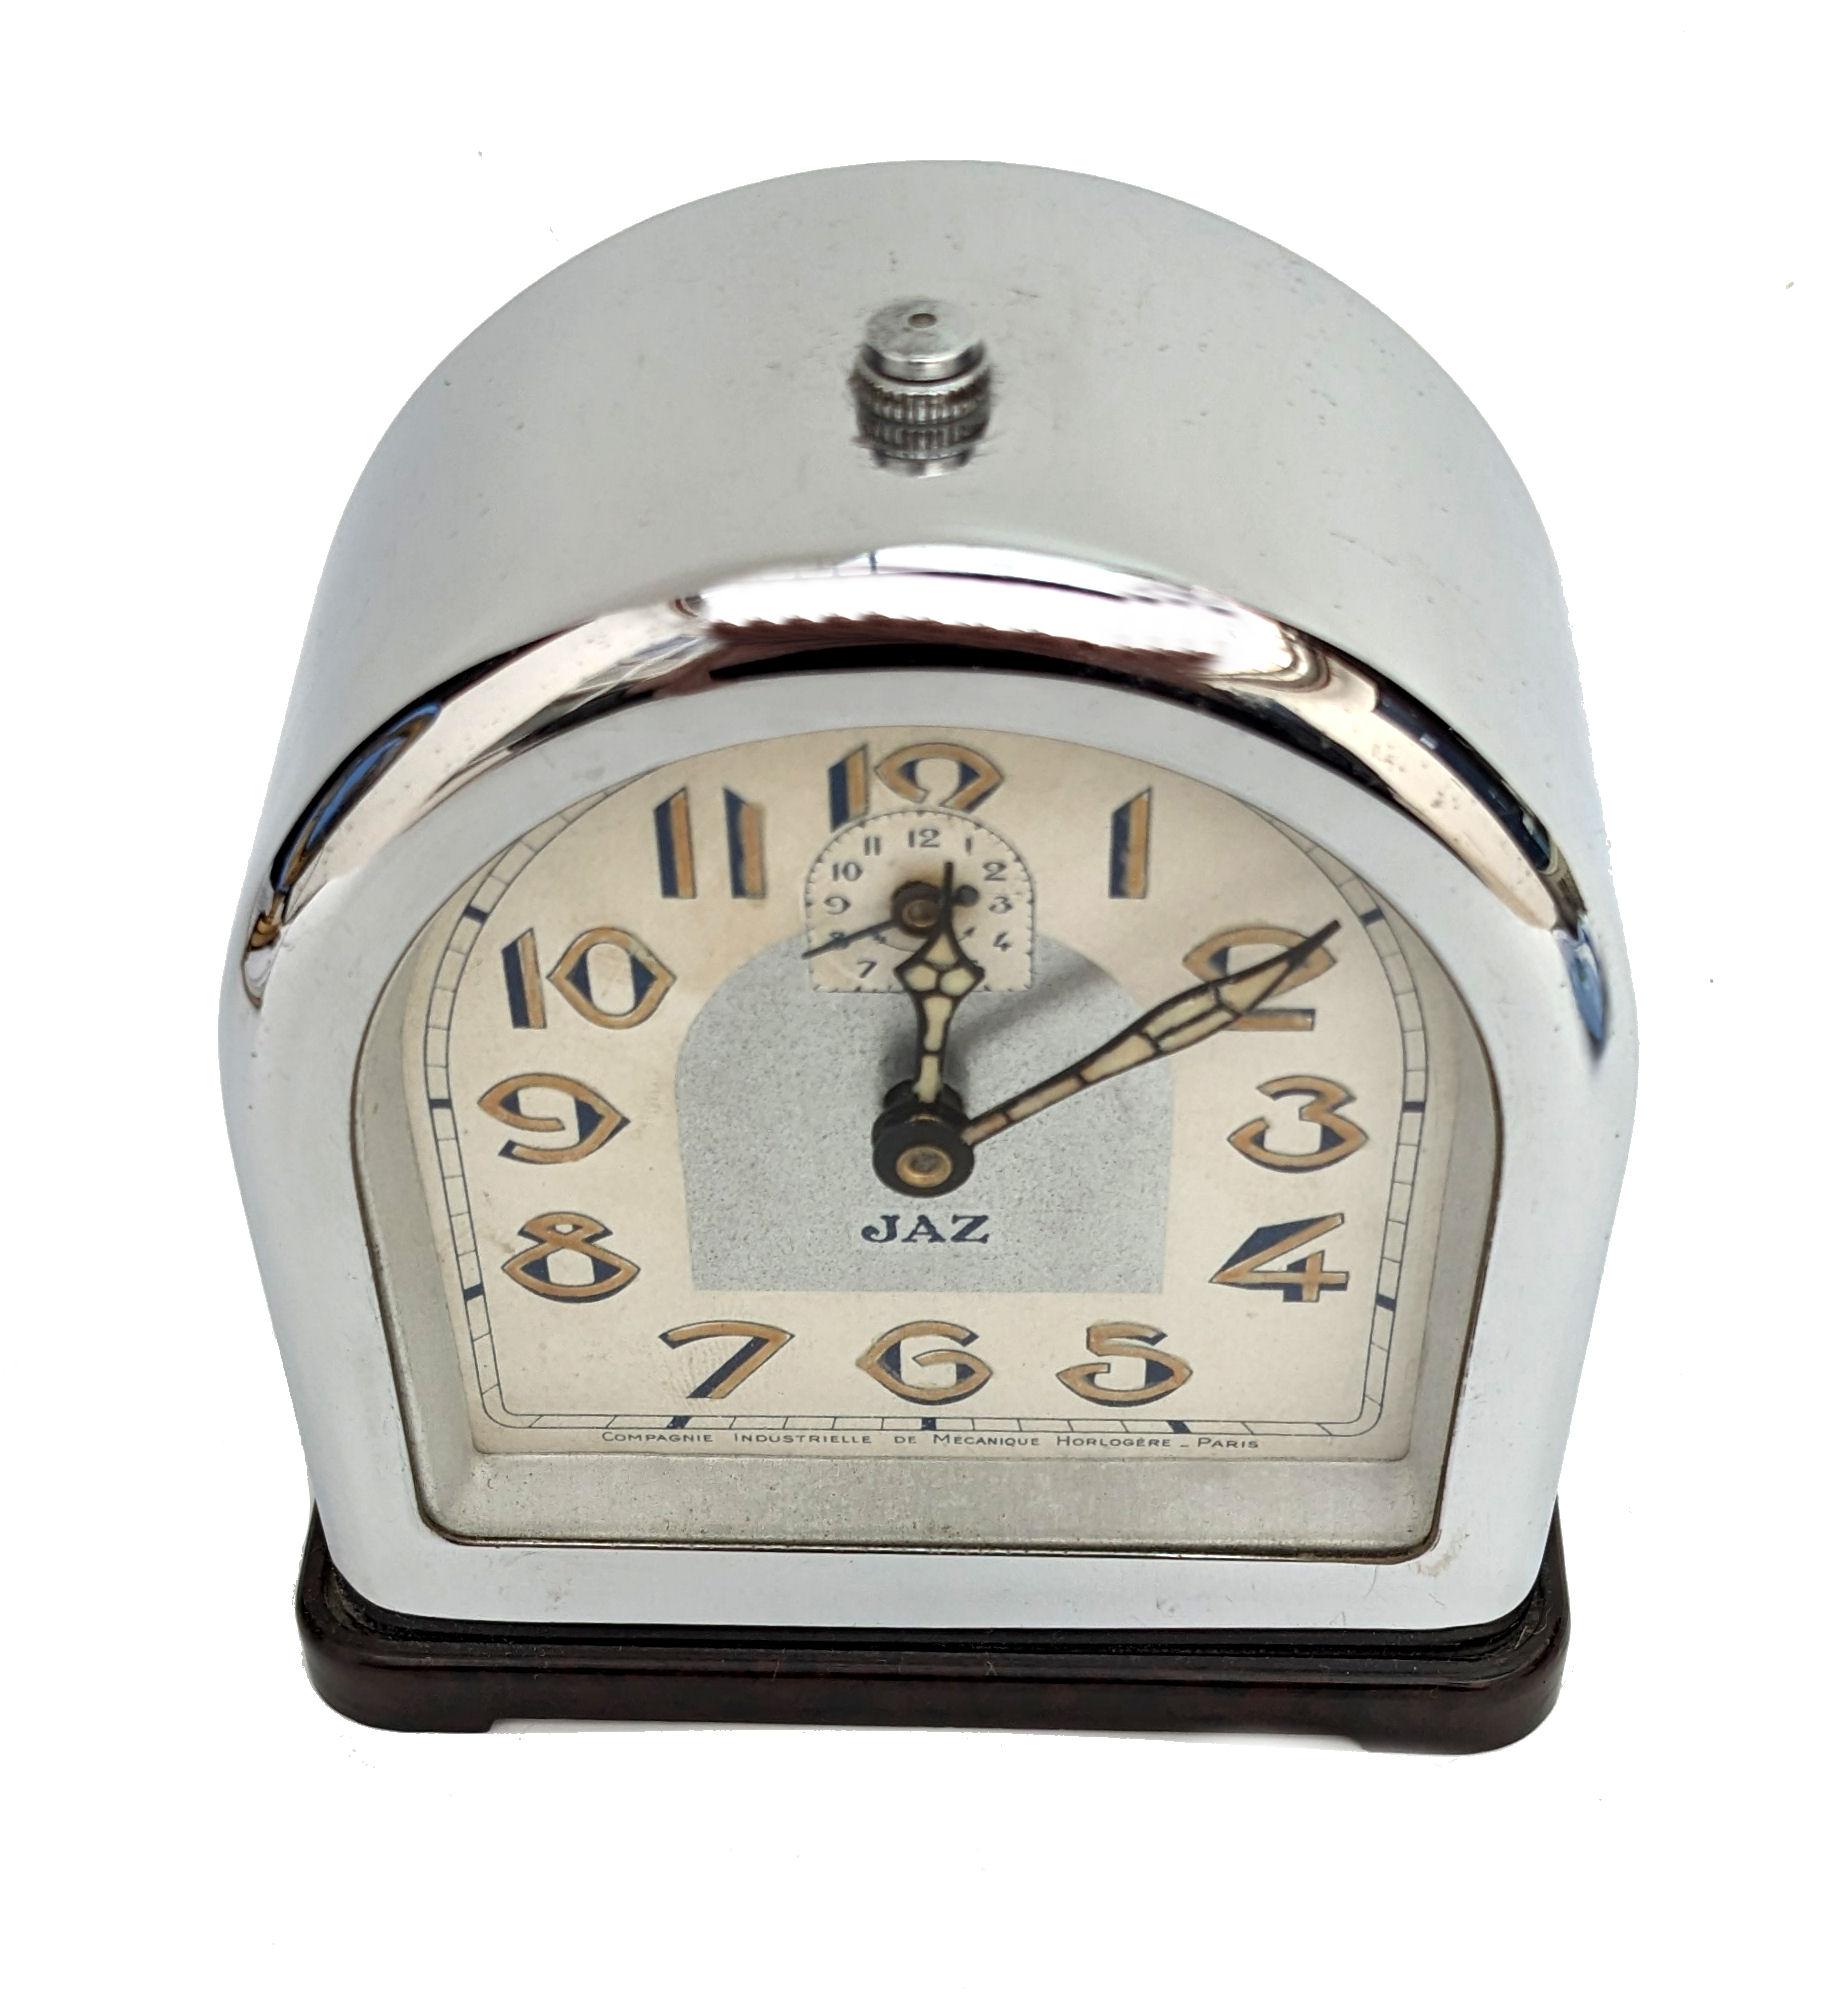 Superb 1930s Art Deco chrome and Bakelite clock made by the Jaz company. This clock is in remarkably good condition. Often these clocks are found with severe chrome tarnishing or pitting but this beauty seems to have stood the test of time ( pun